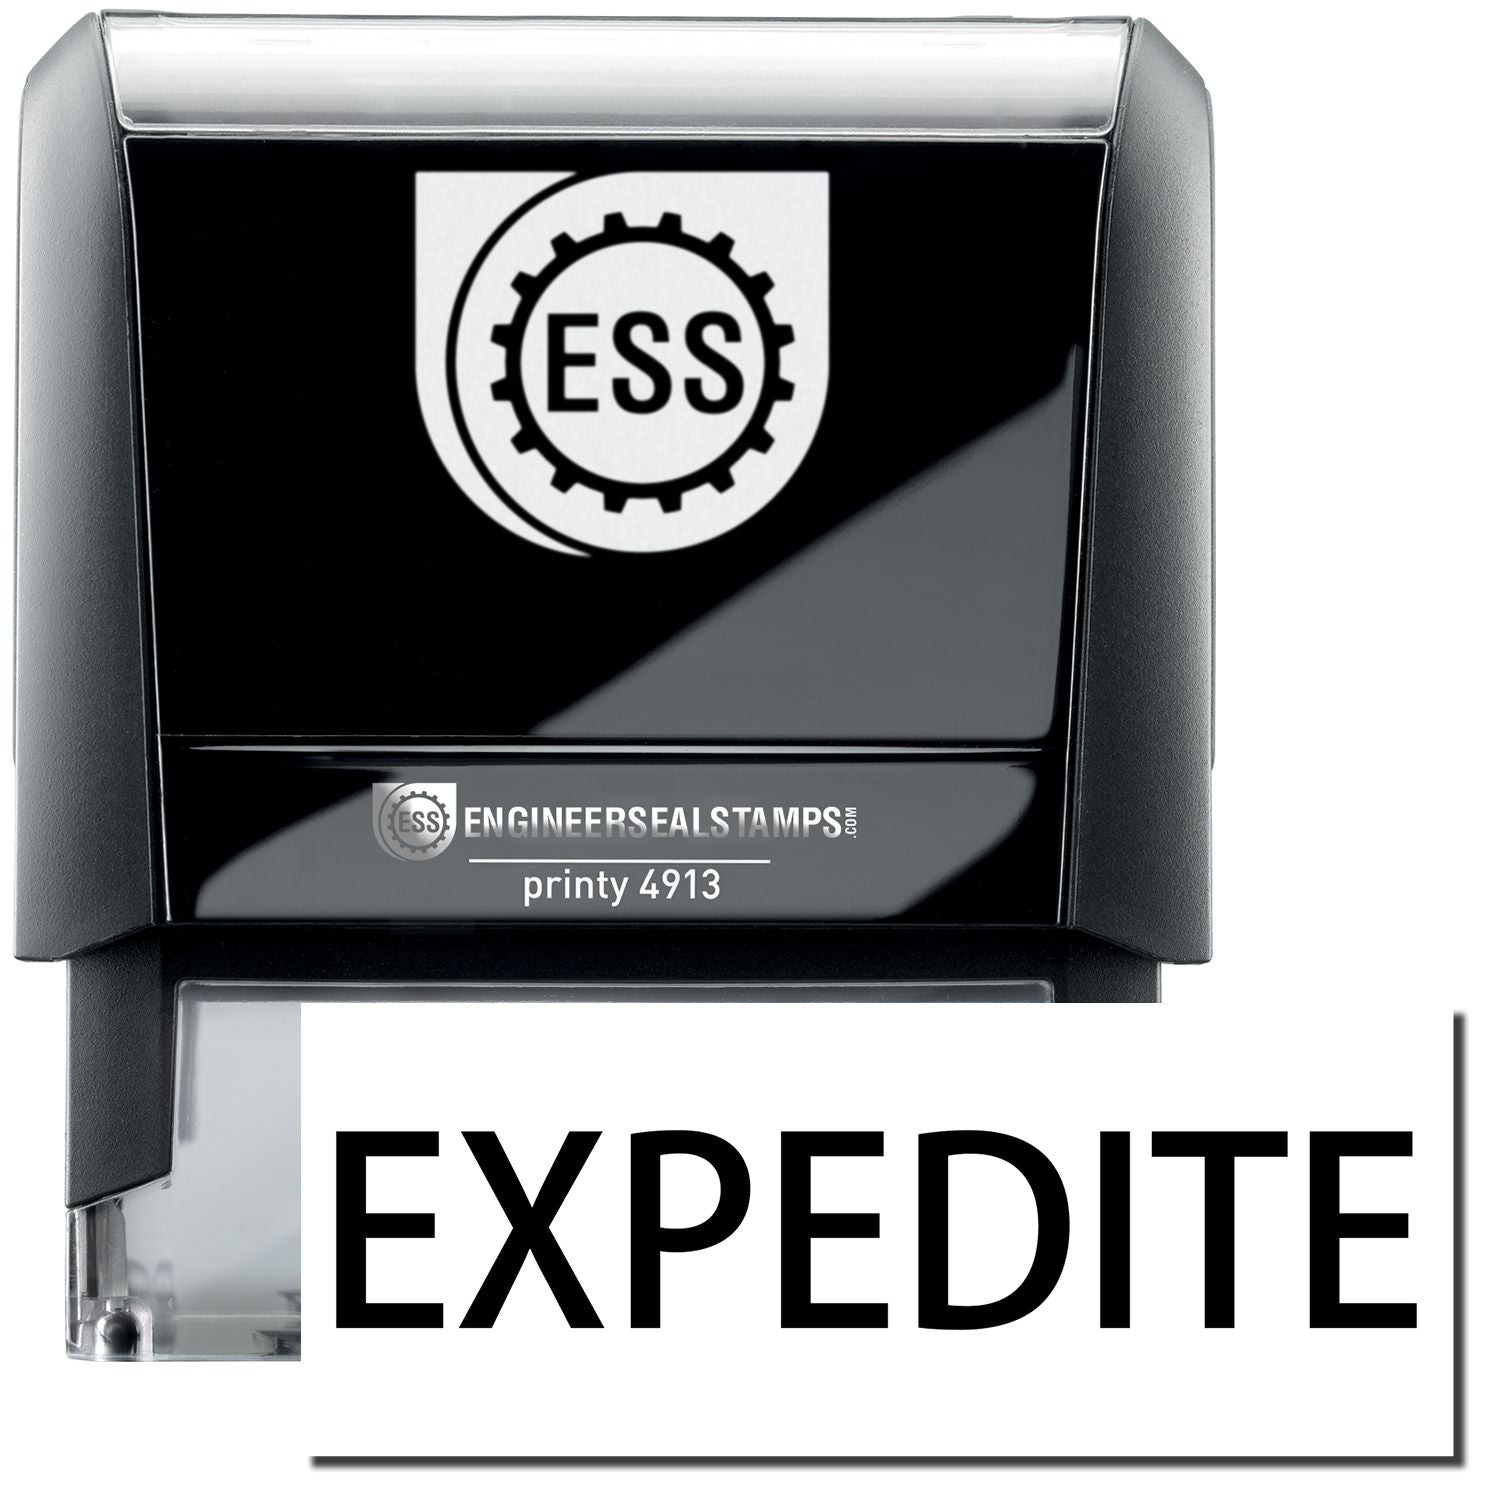 A self-inking stamp with a stamped image showing how the text "EXPEDITE" in a large bold font is displayed by it.